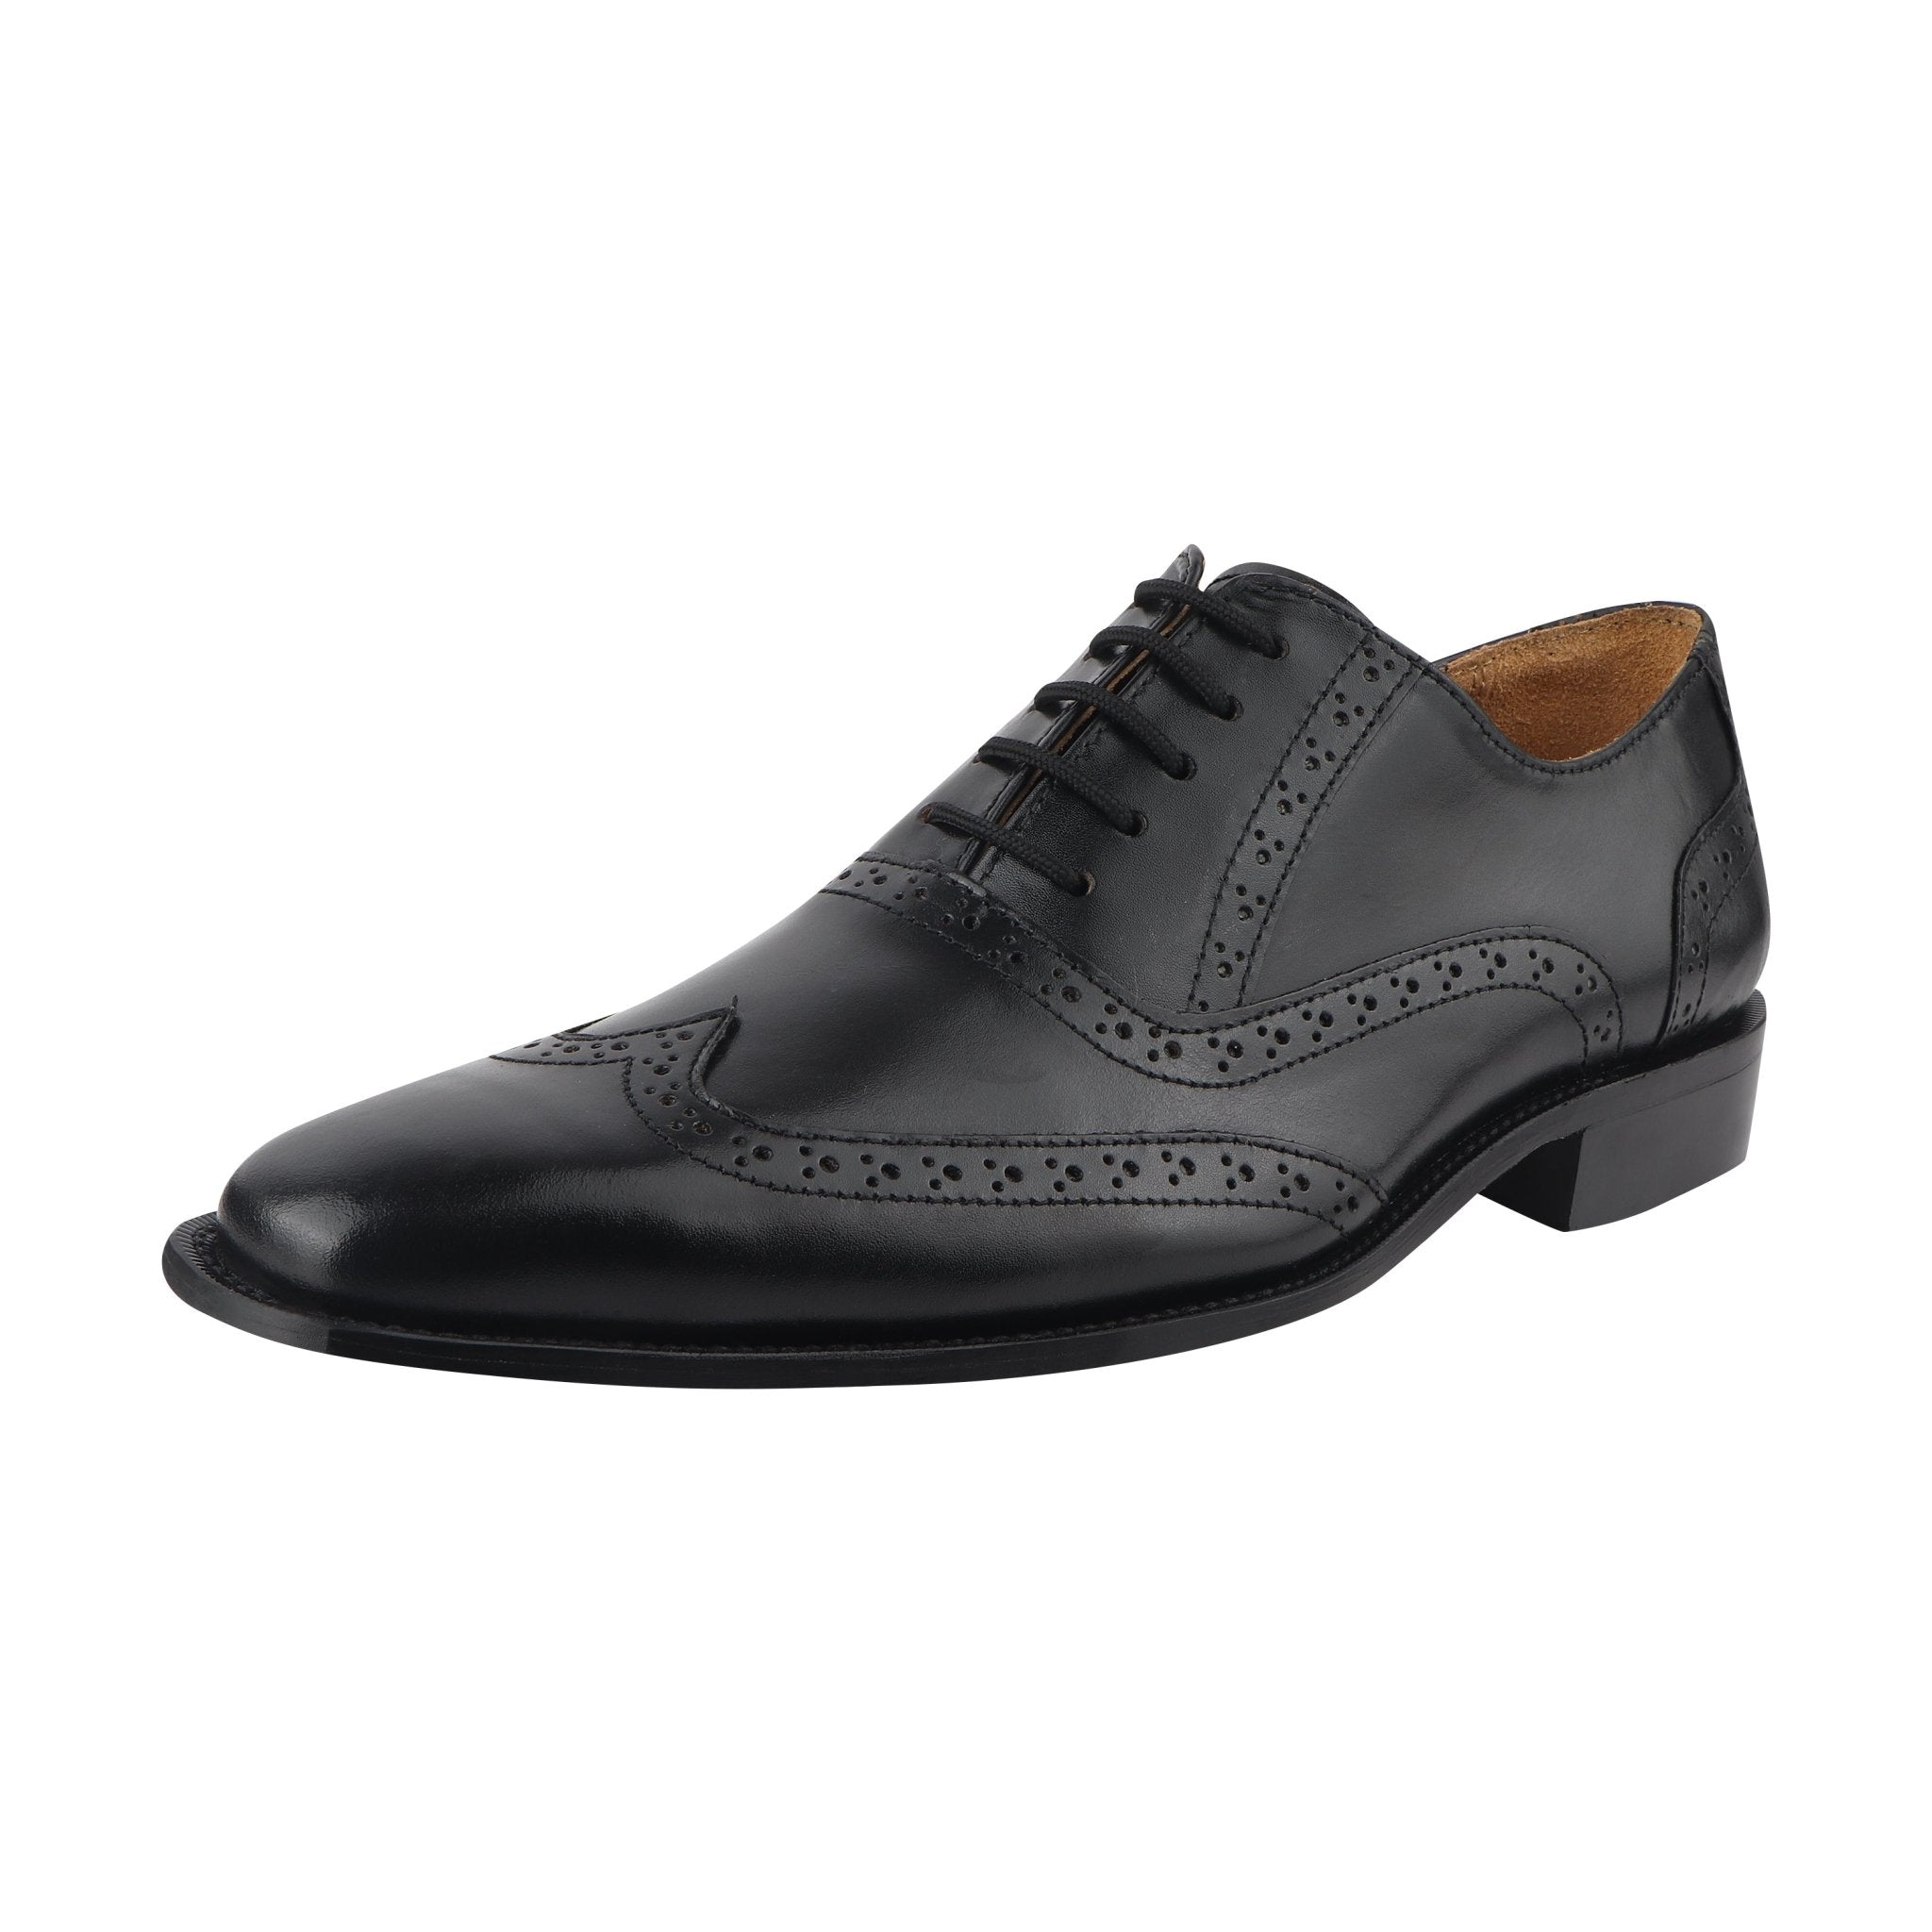 Aaron Leather Oxford Style Men's Dress Shoes With Burnished Perforated ...